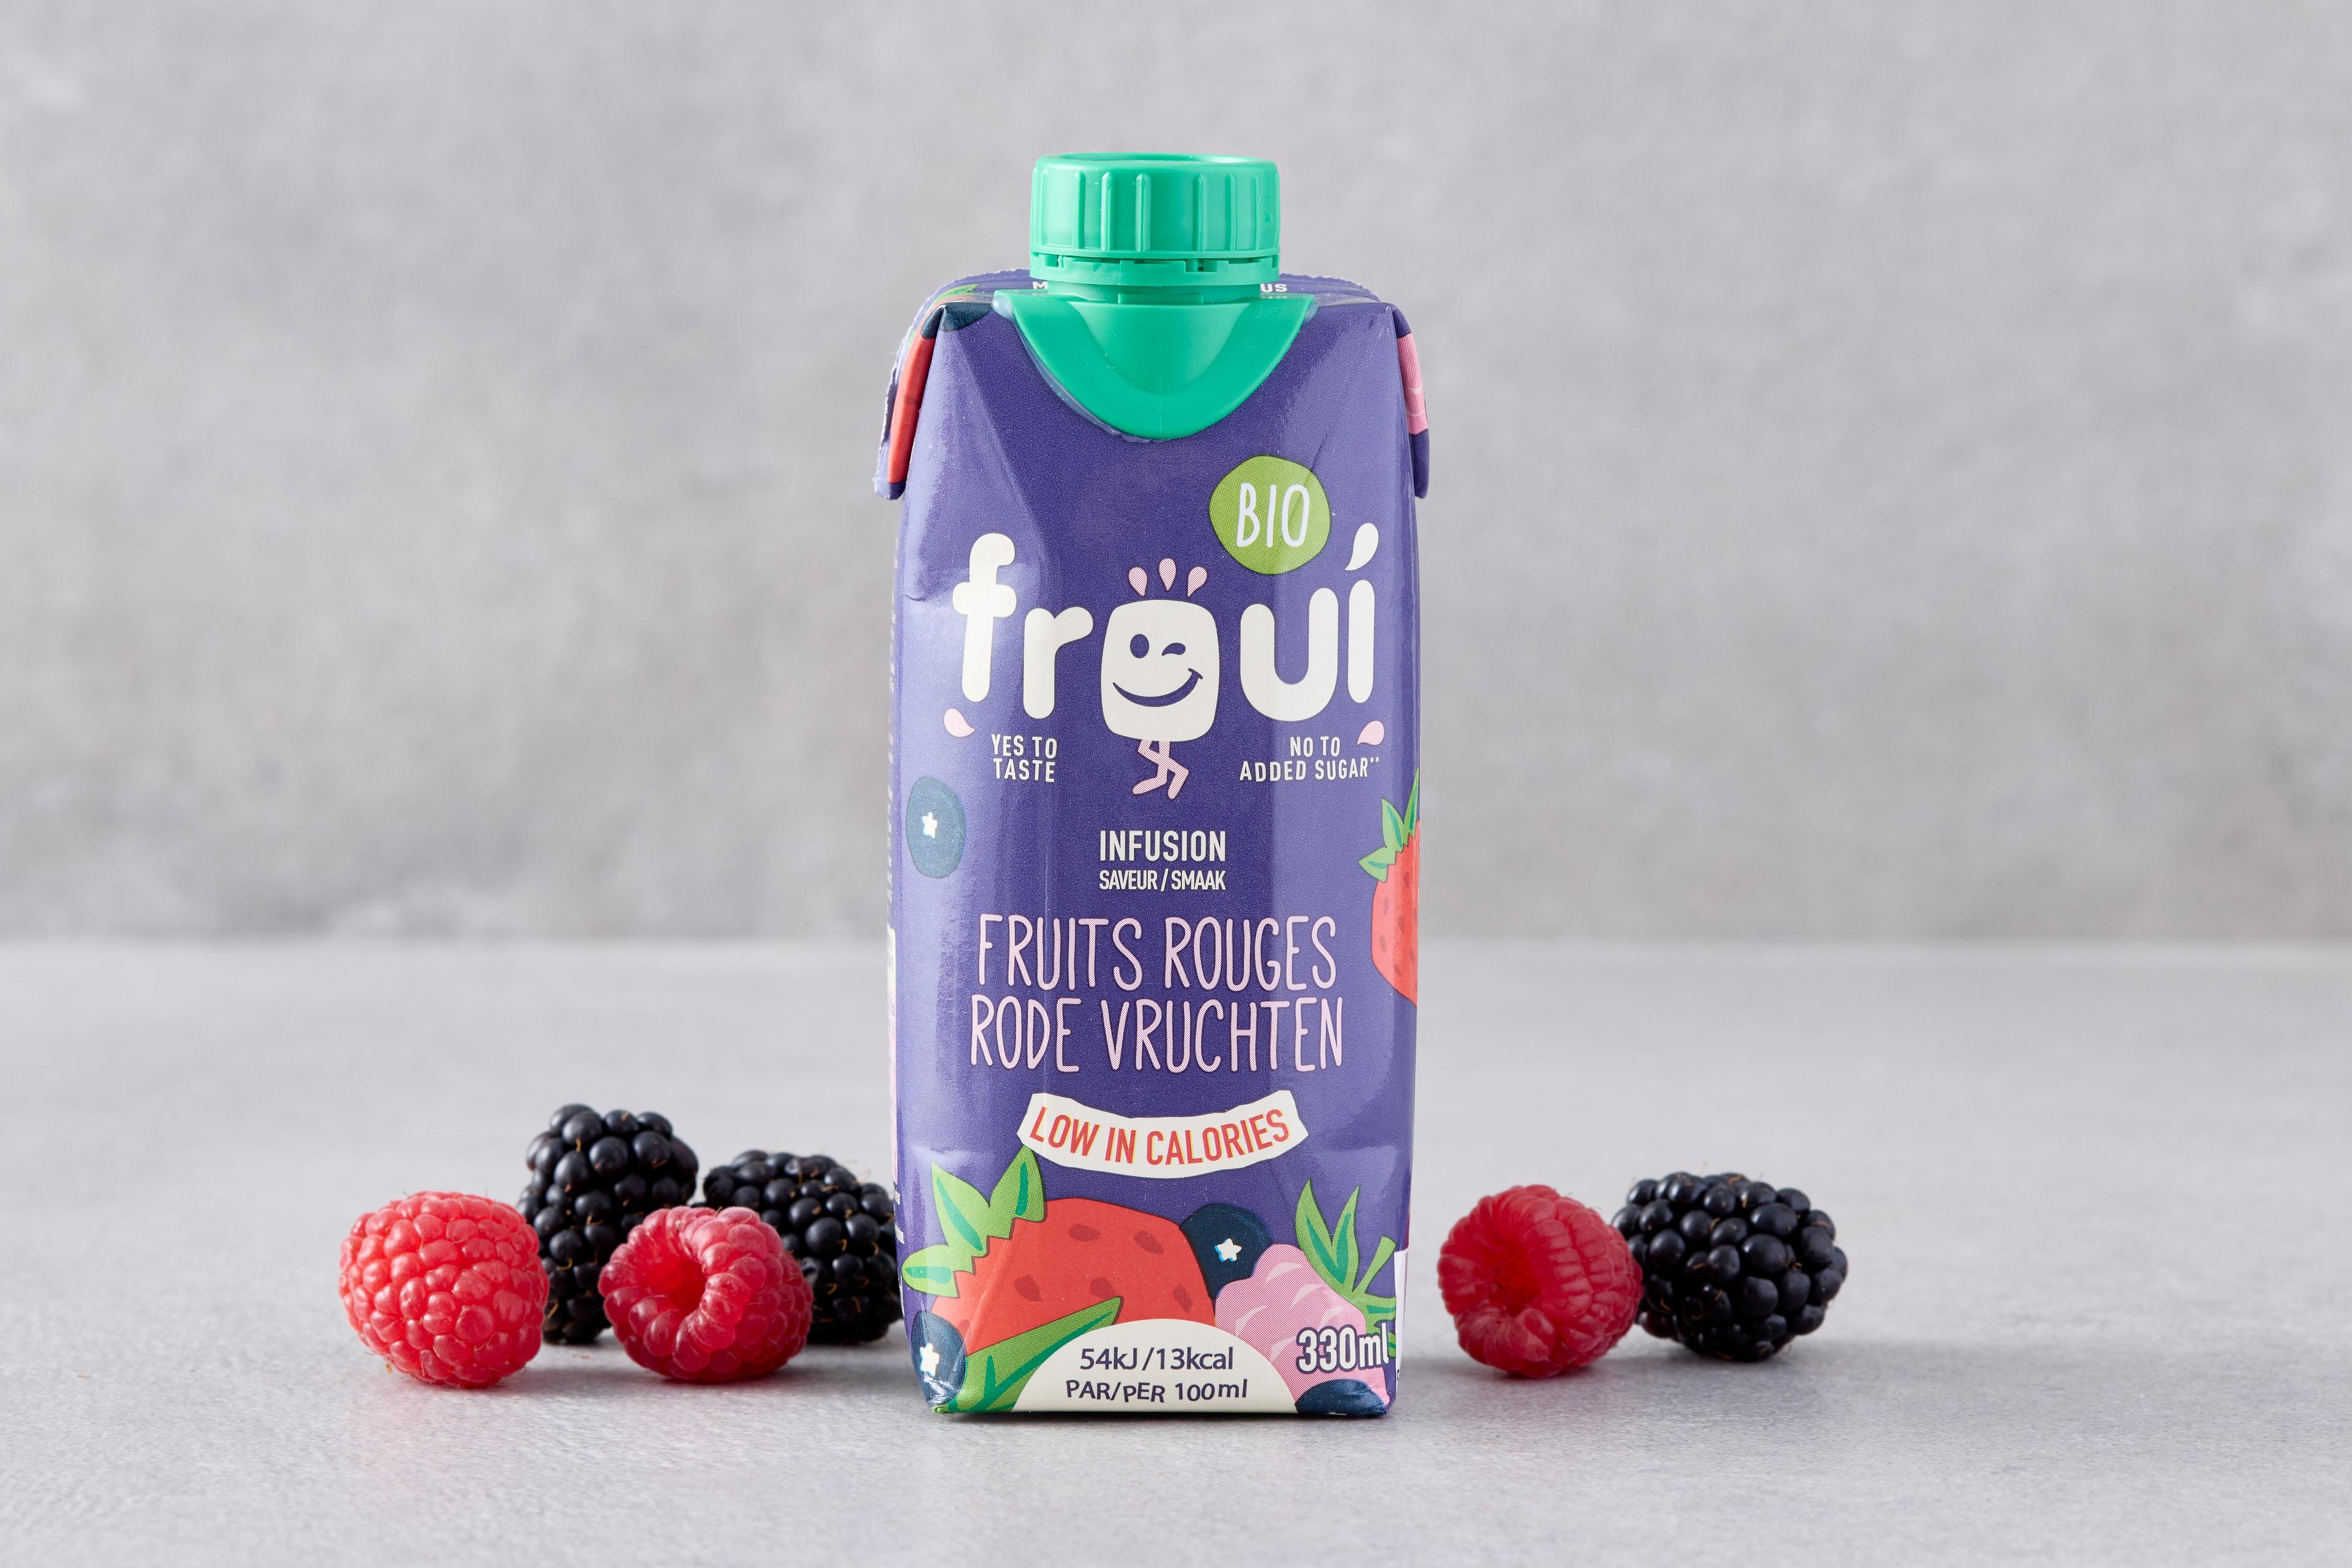 Infusion saveur Fruits rouges